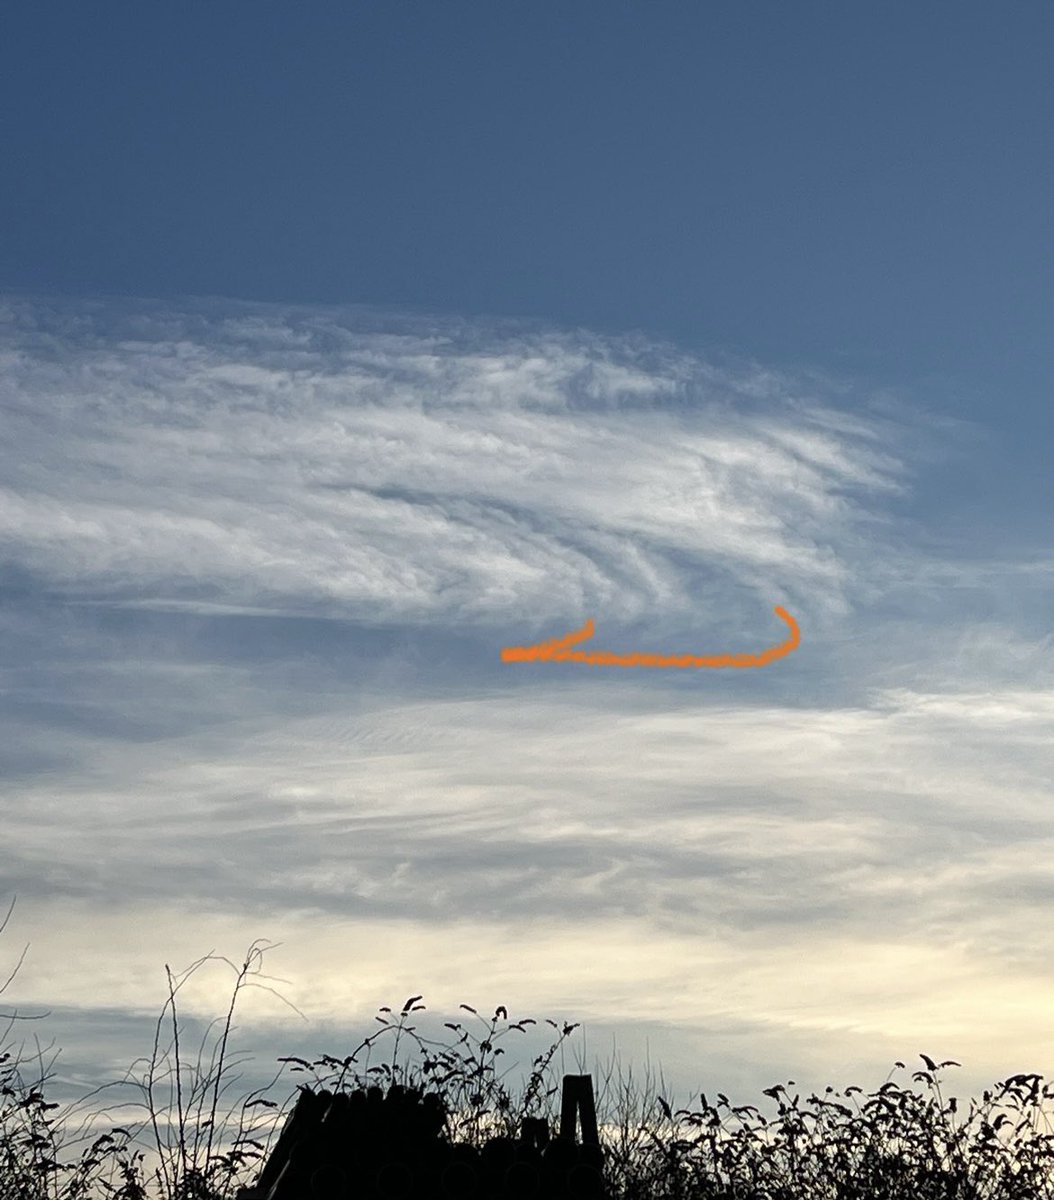 Only on the day the @McLarenF1 MCL38 fires up I see this in the sky 🖤🧡🏎️🔥☁️ #WhateverItTakes #FansLikeNoOther #BelieveInMclaren